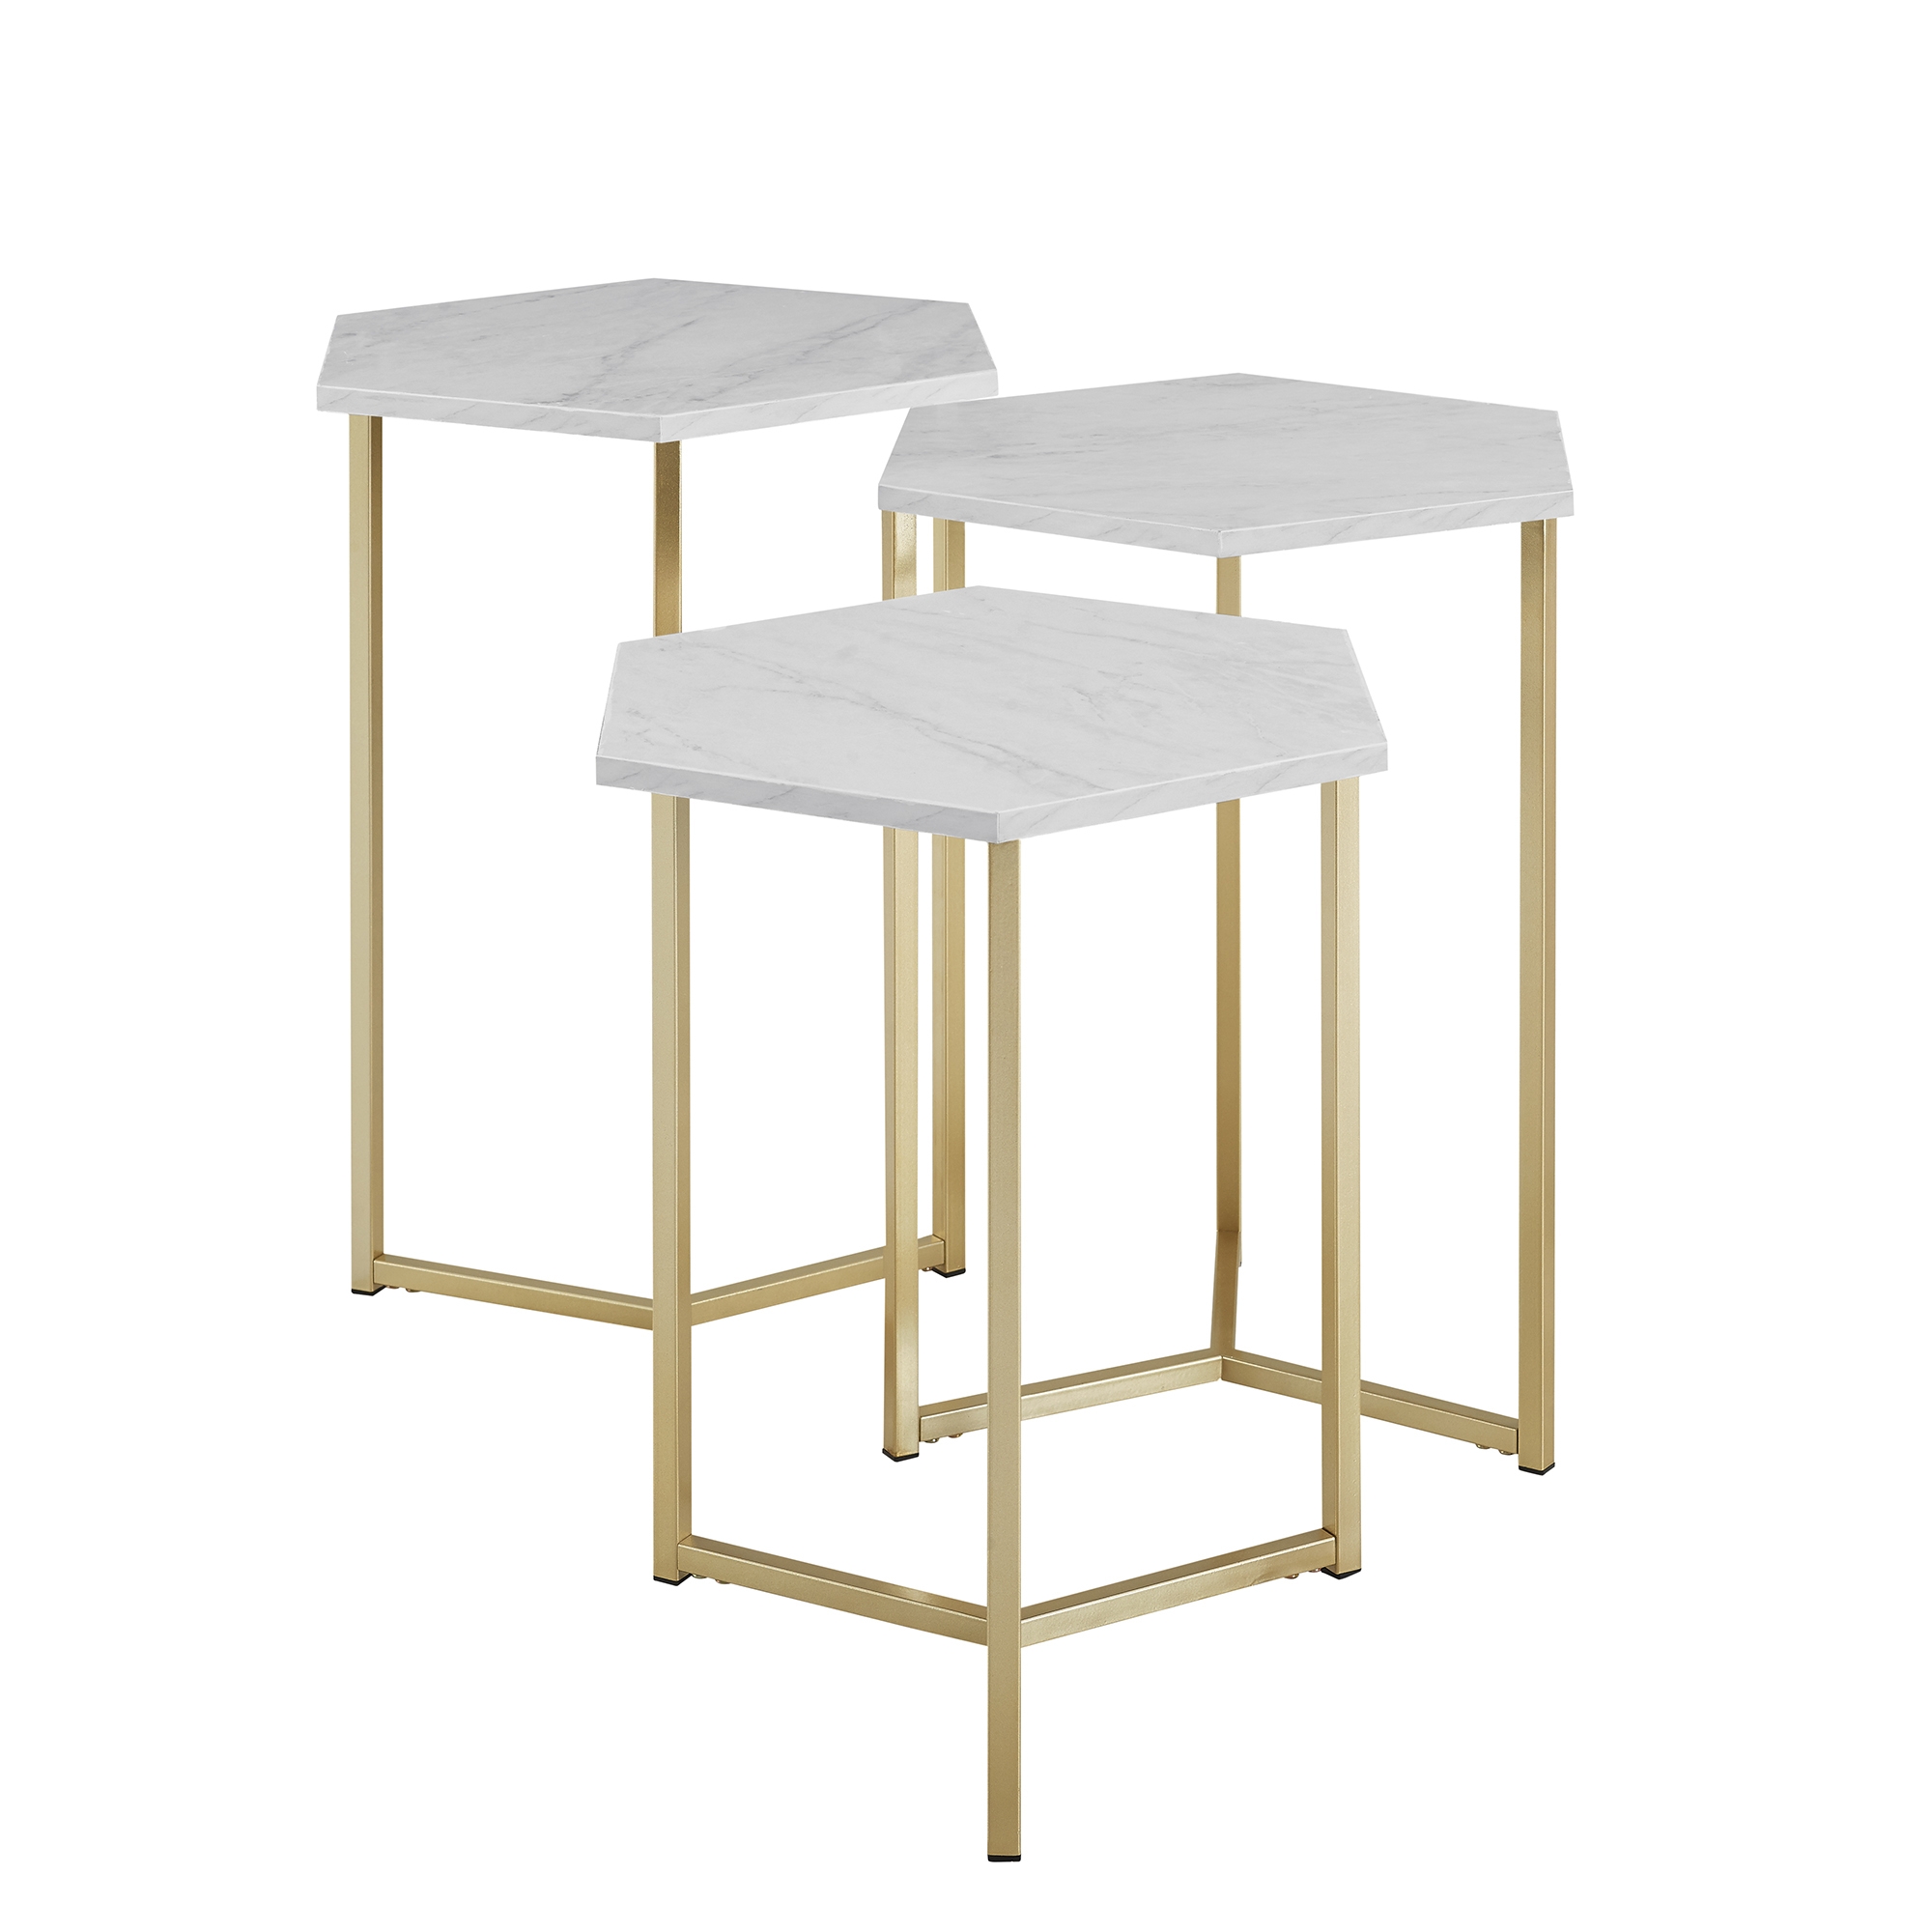 Hexagon Modern Wood Nesting Tables, Set of 3 - Faux White Marble/Gold  - Image 2